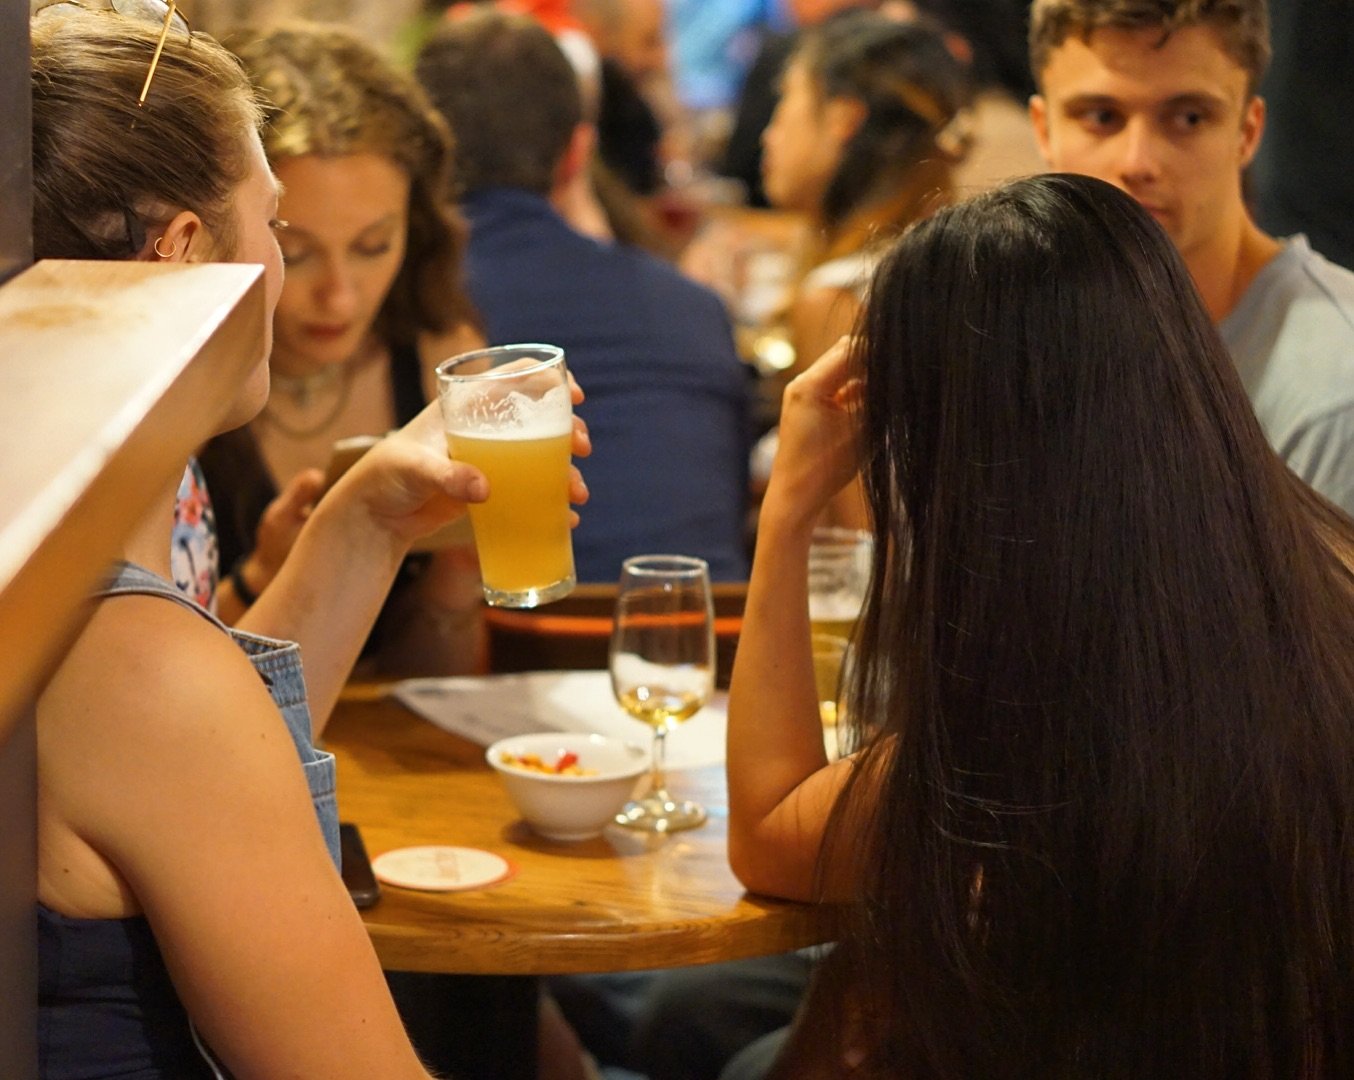 🍻Redfern Tuesday Trivia is ON today! Don&rsquo;t forget to book a table via link on our bio!

Trivia from 7pm! Get in from 4-6 for Hoppy Hour. Doors open at 4pm.

Anyone can win some beers, beer tabs and impress your mates with your general knowledg